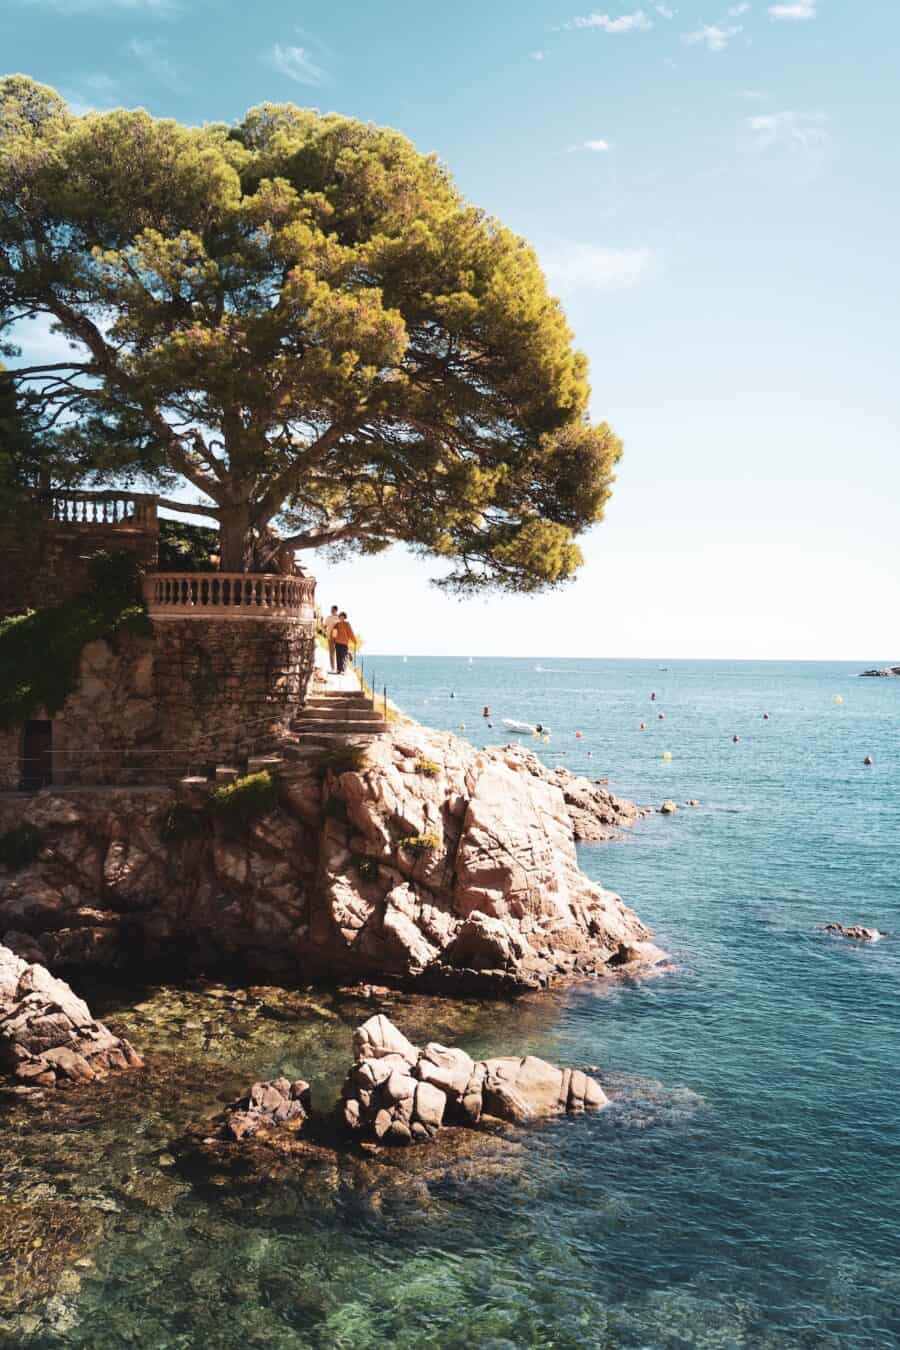 Coco Tran — Aesthetic Travel Blog By Film Photographer Coco Tran https://cocotran.com/the-ultimate-guide-to-begur-spain-costa-brava/